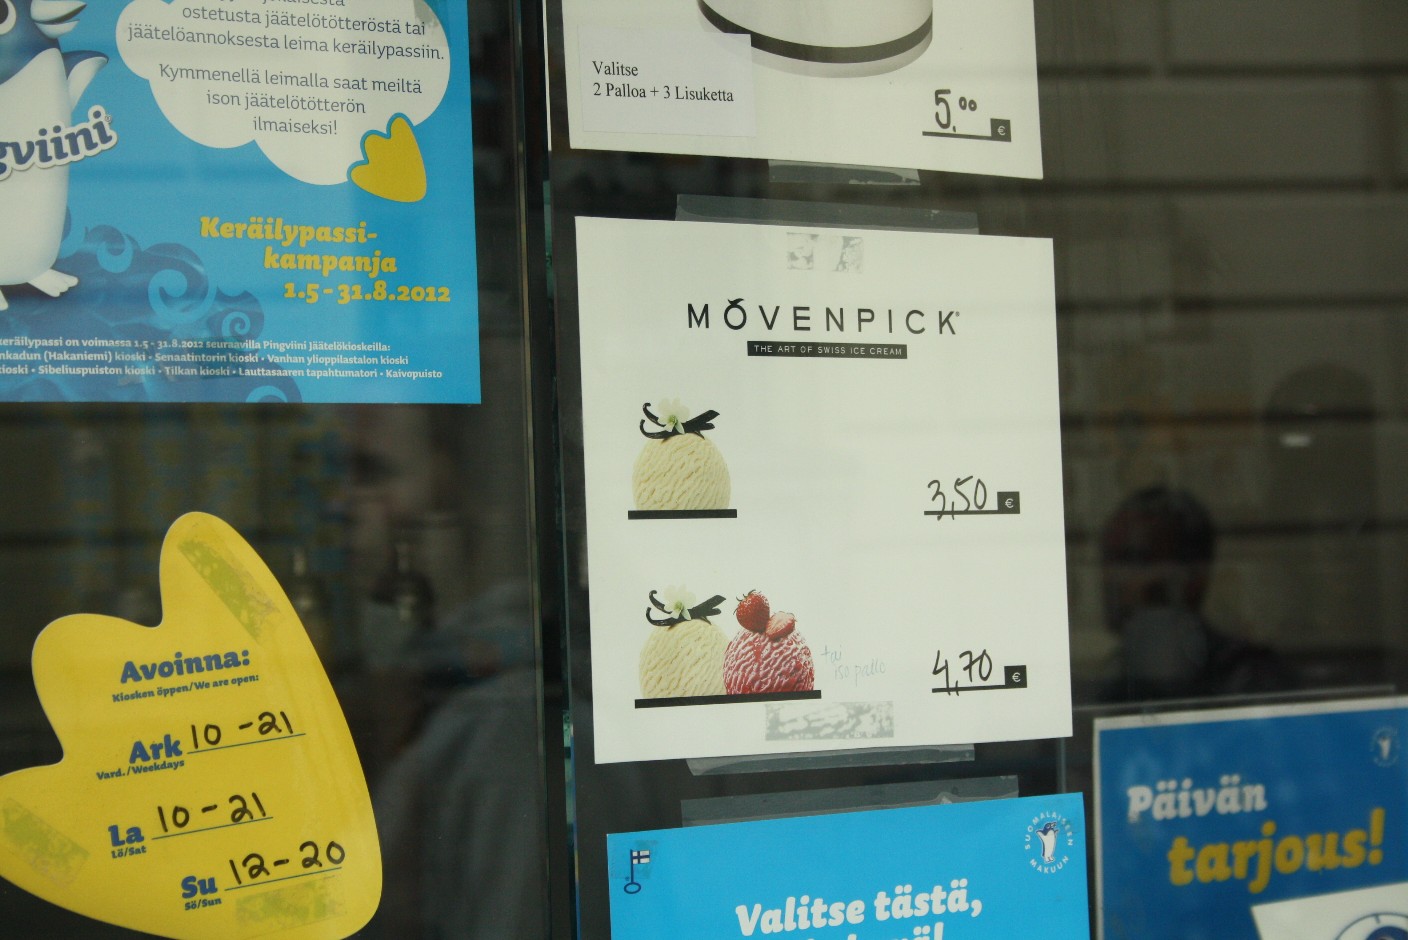 Shocking prices for ice-cream. In Germany one scoop of ice-cream would be 0,70 Euro at that time. 